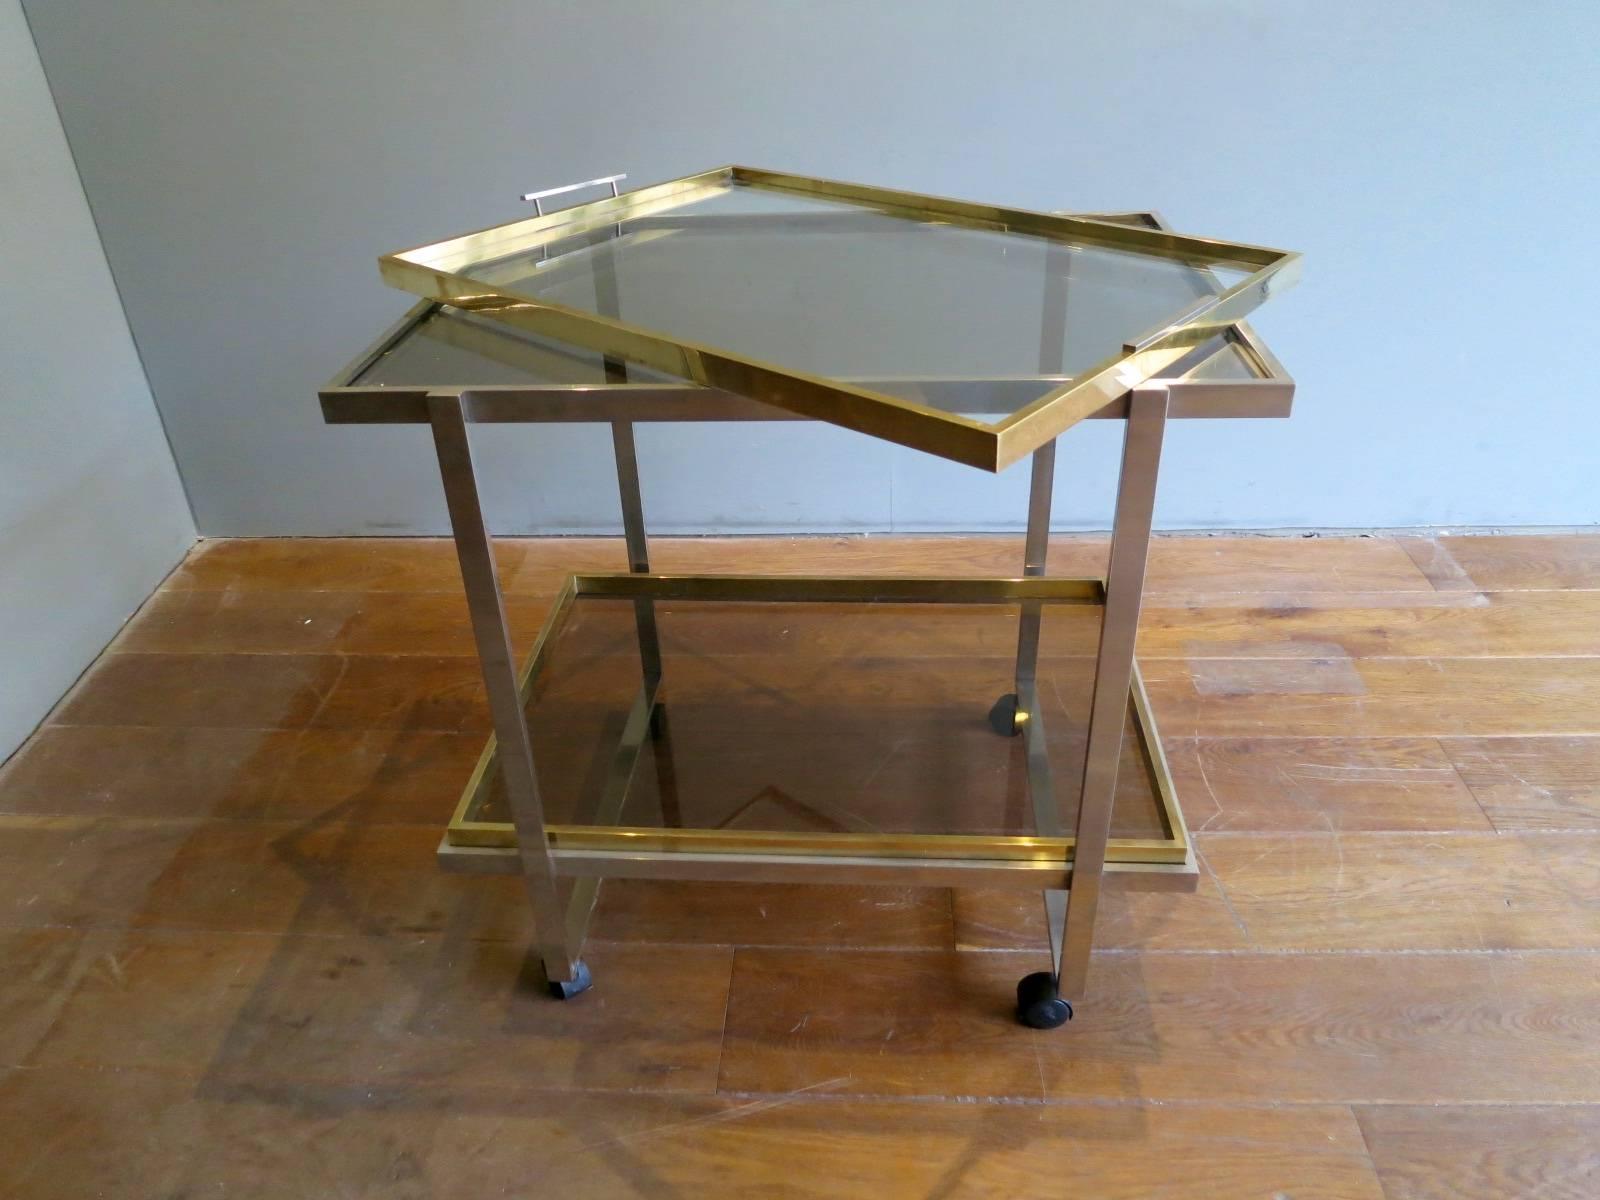 A brass and chrome two-tiered bar cart with removable top tray, also with hidden handles that slide up for use. Continental.